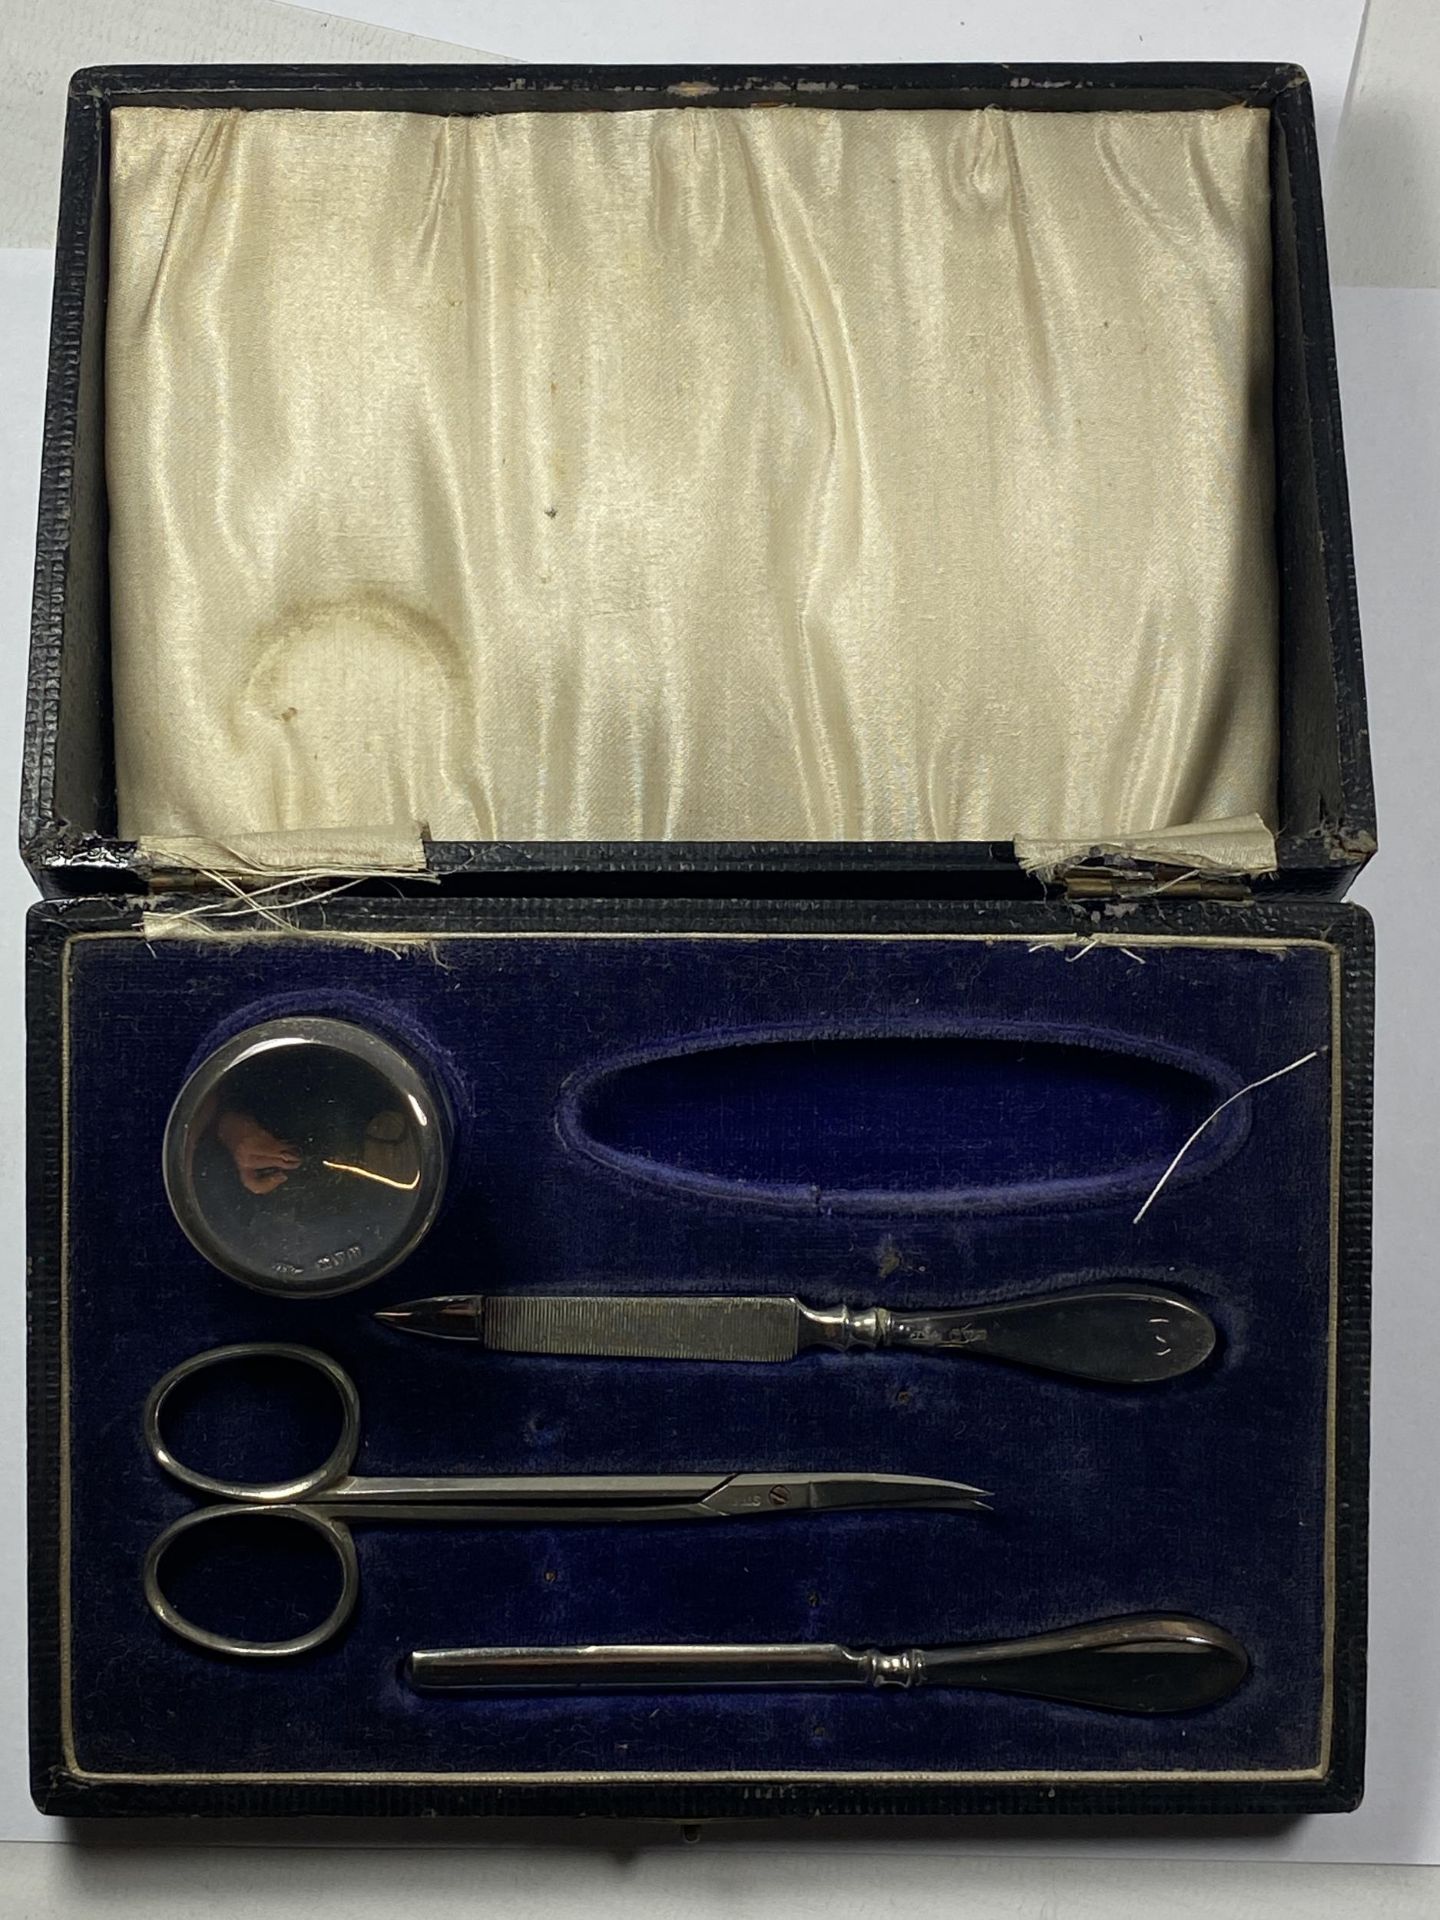 A CASED CHESTER HALLMARKED SILVER MANICURE SET (MISSING ONE ITEM)